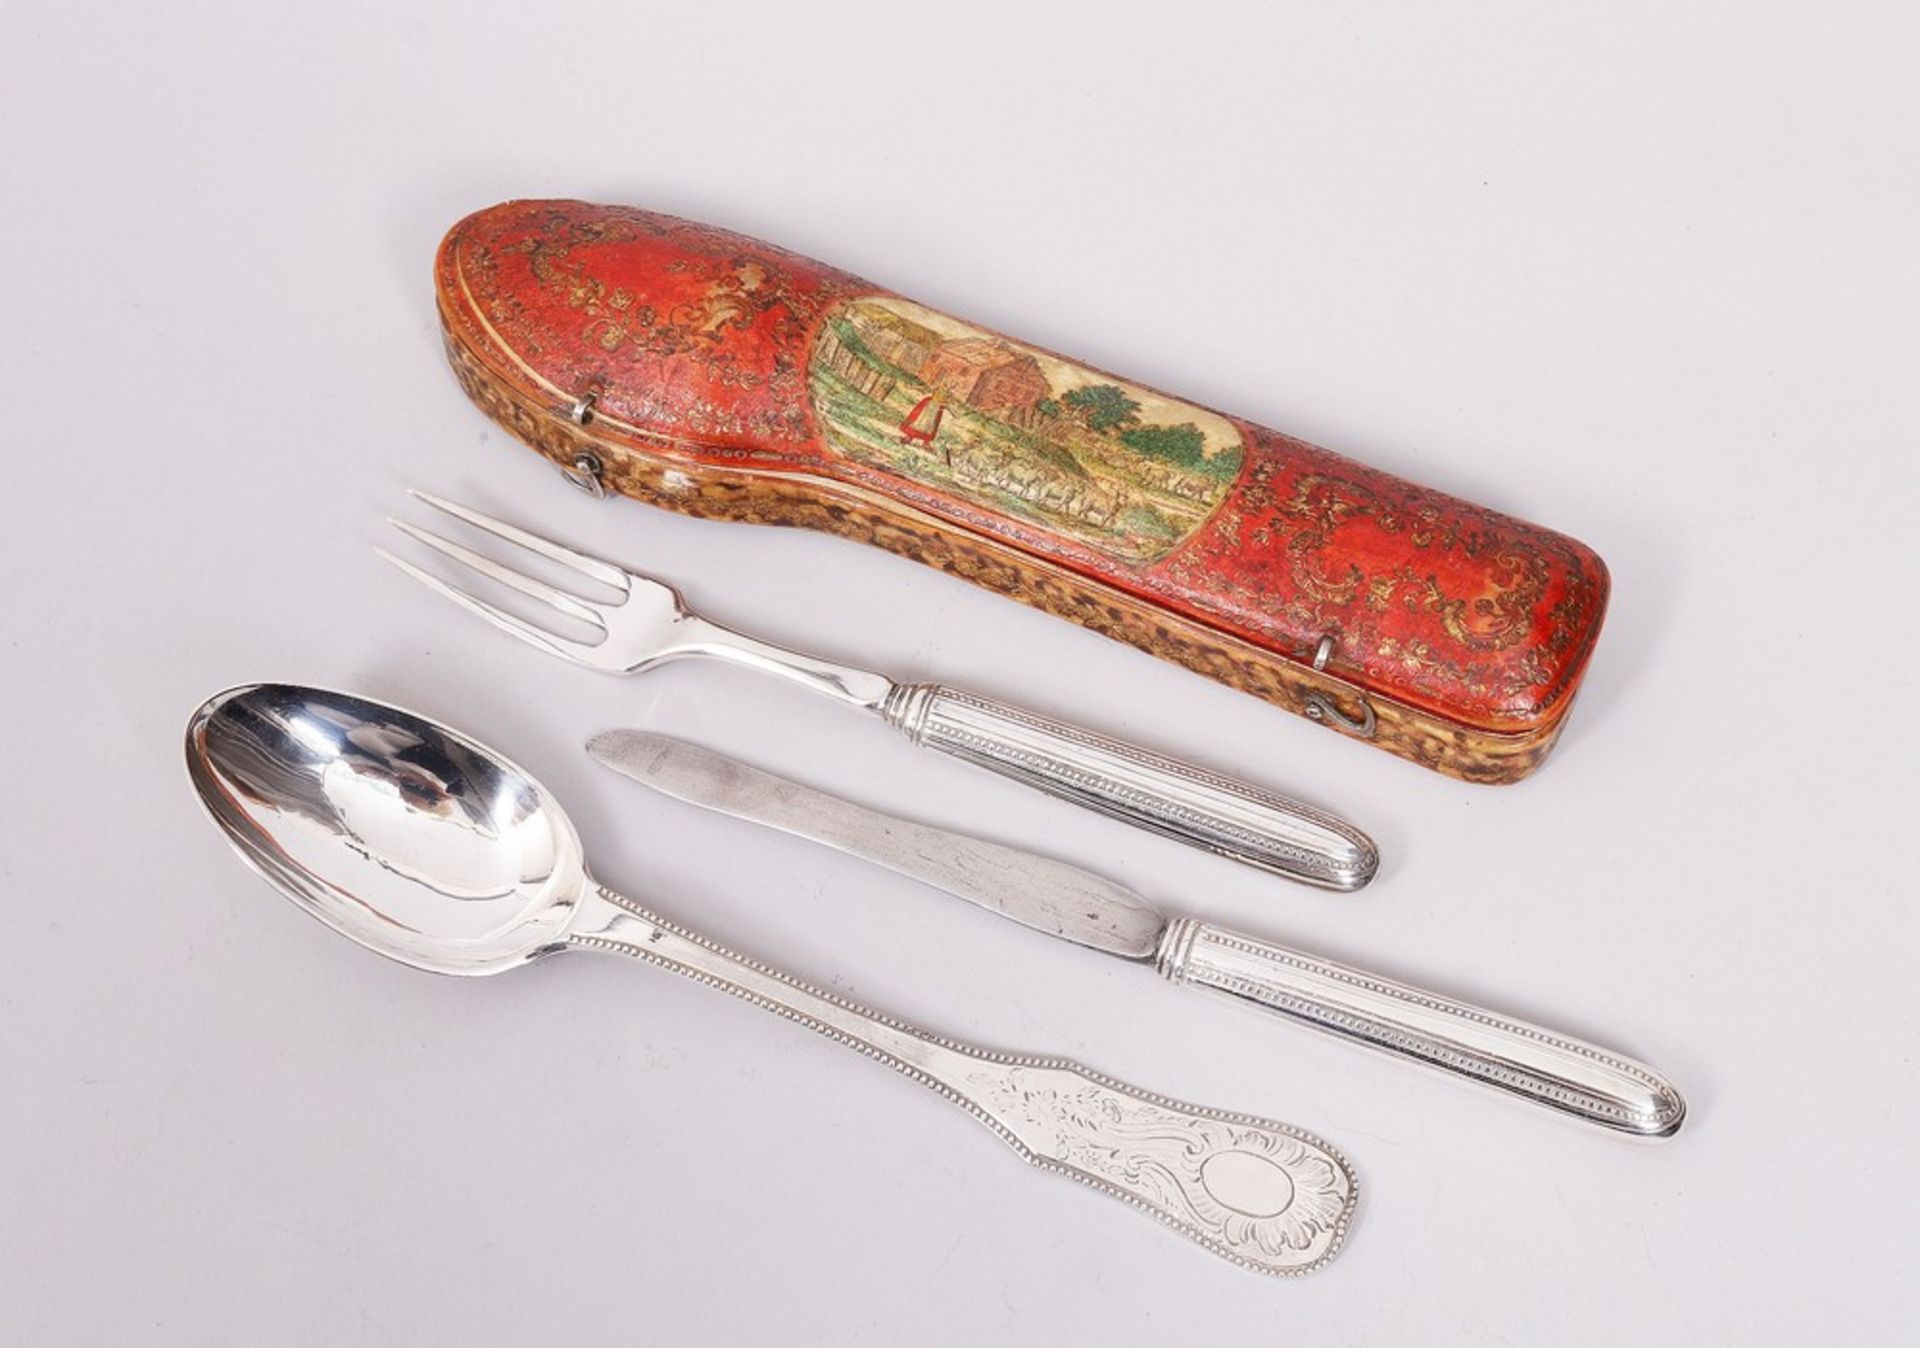 Travel cutlery in case, silver/metal, 18th/19th C.